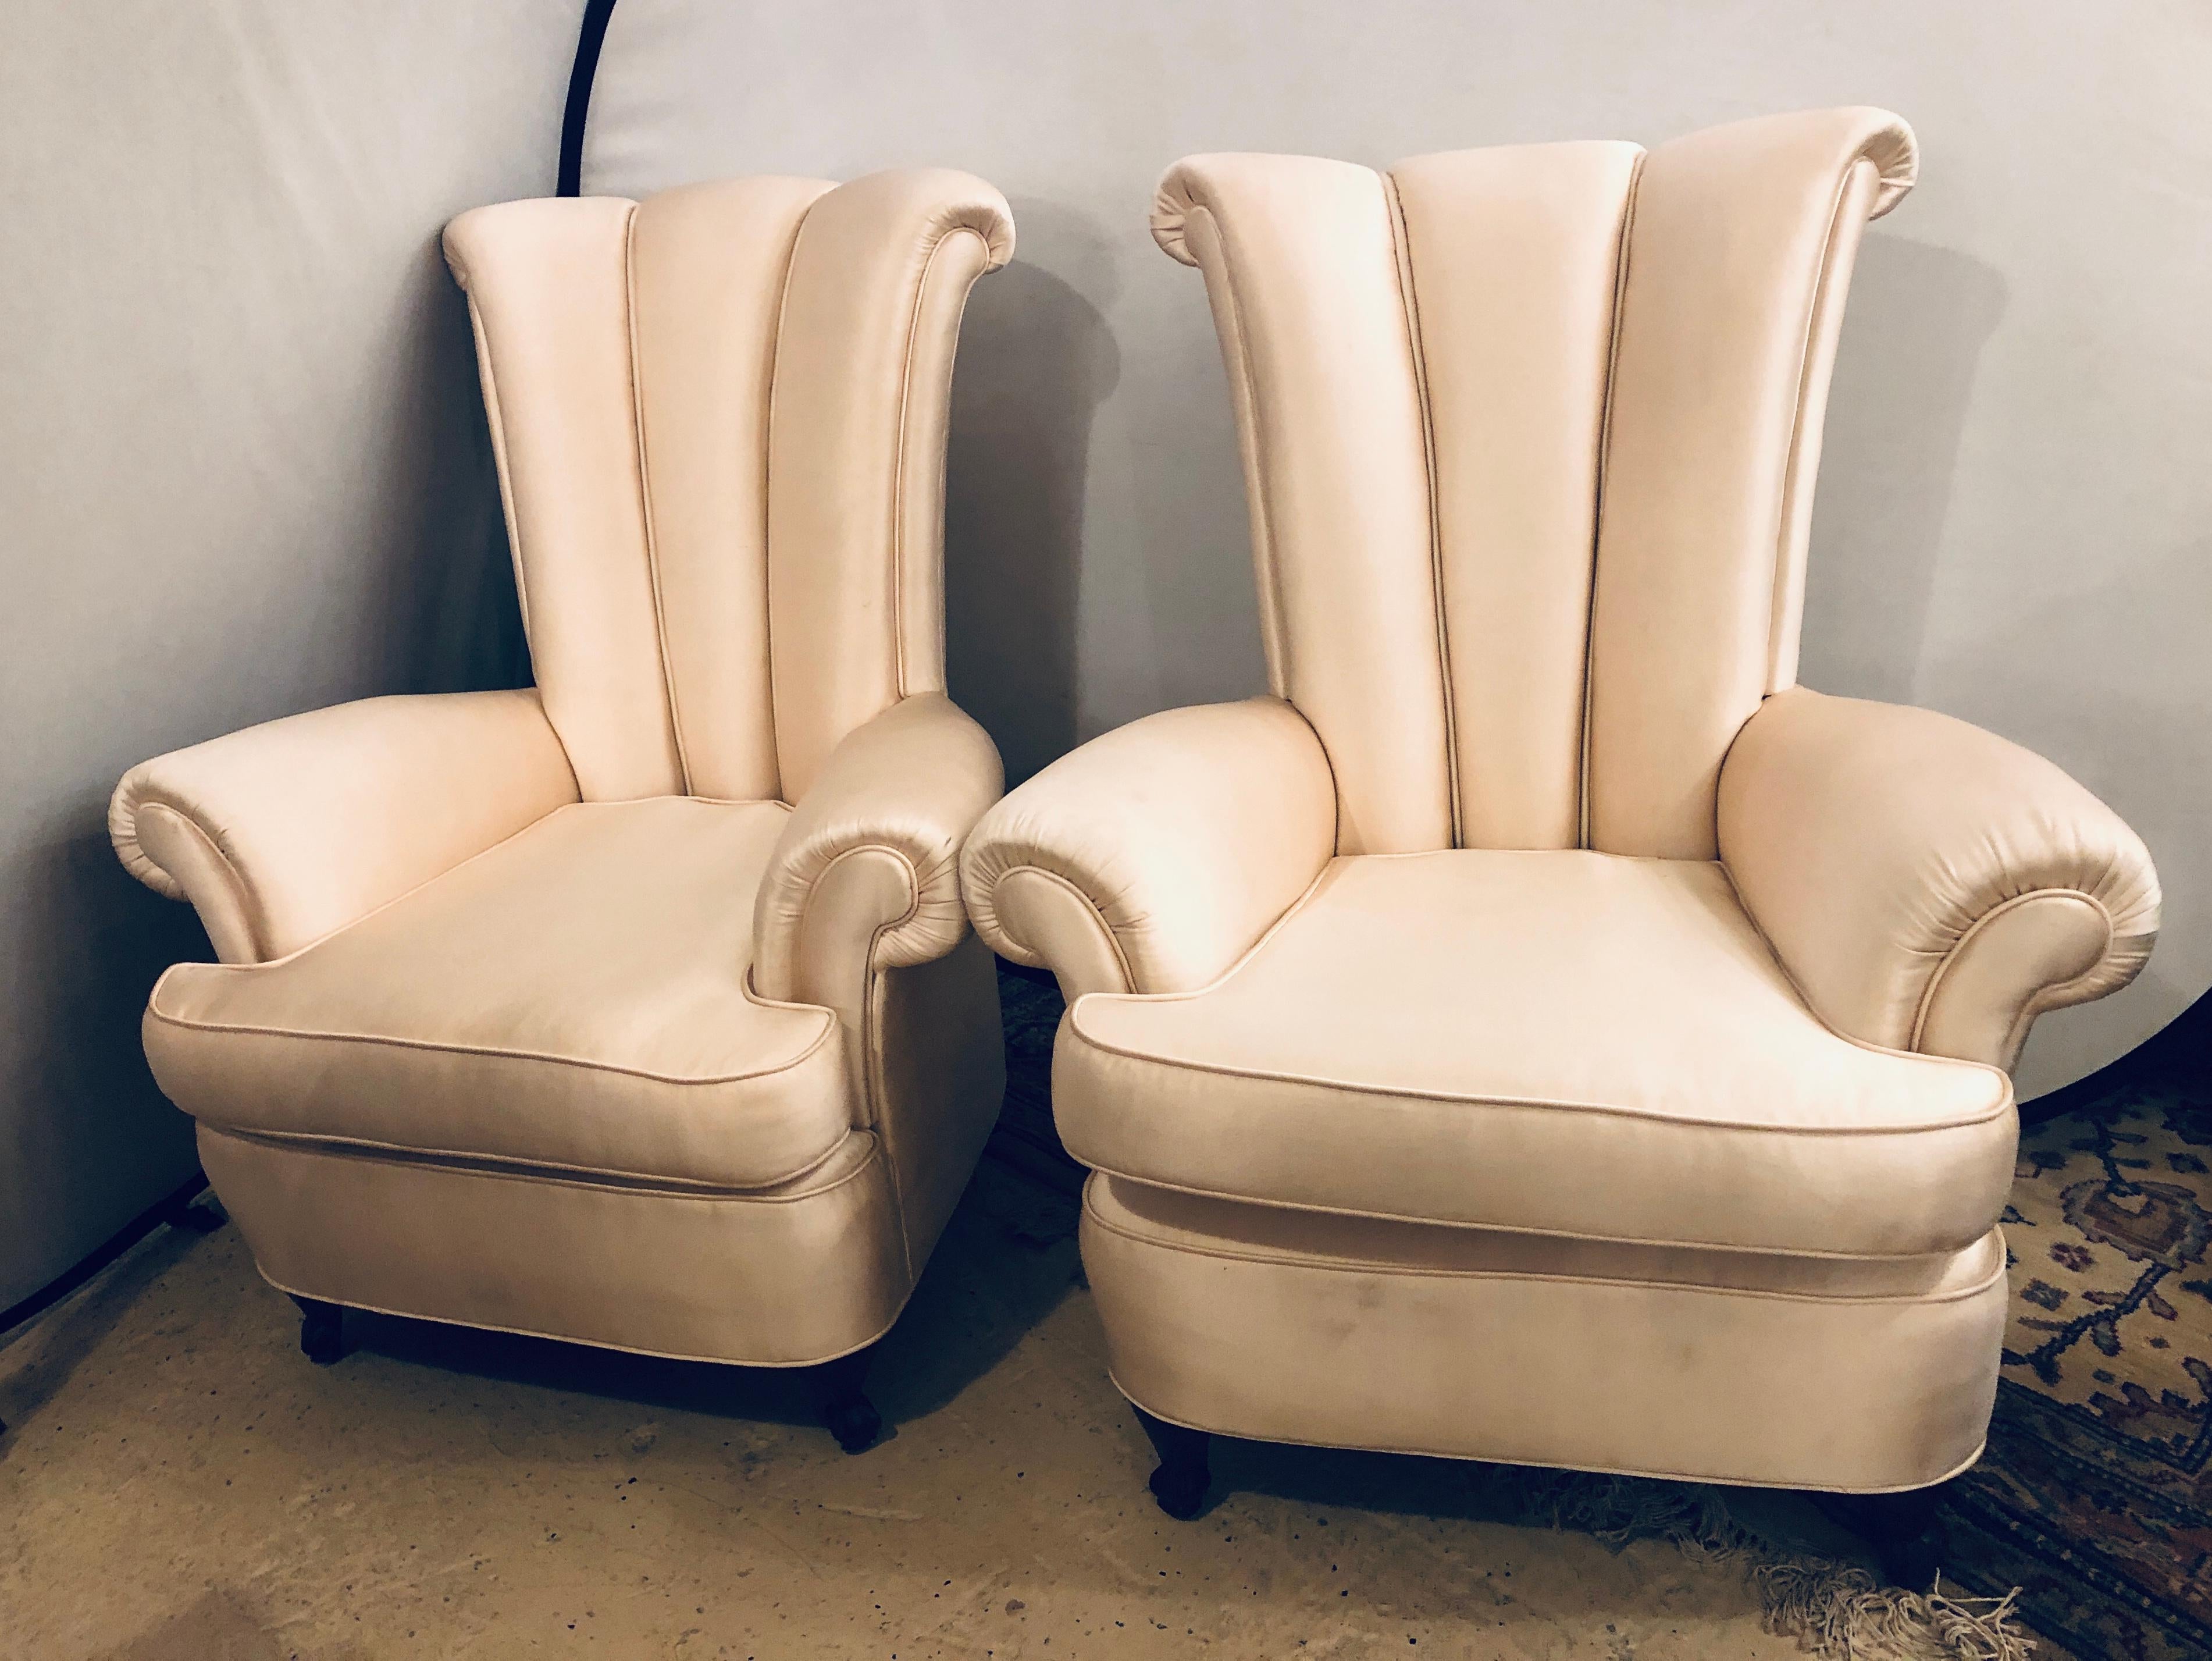 channel back chairs for sale